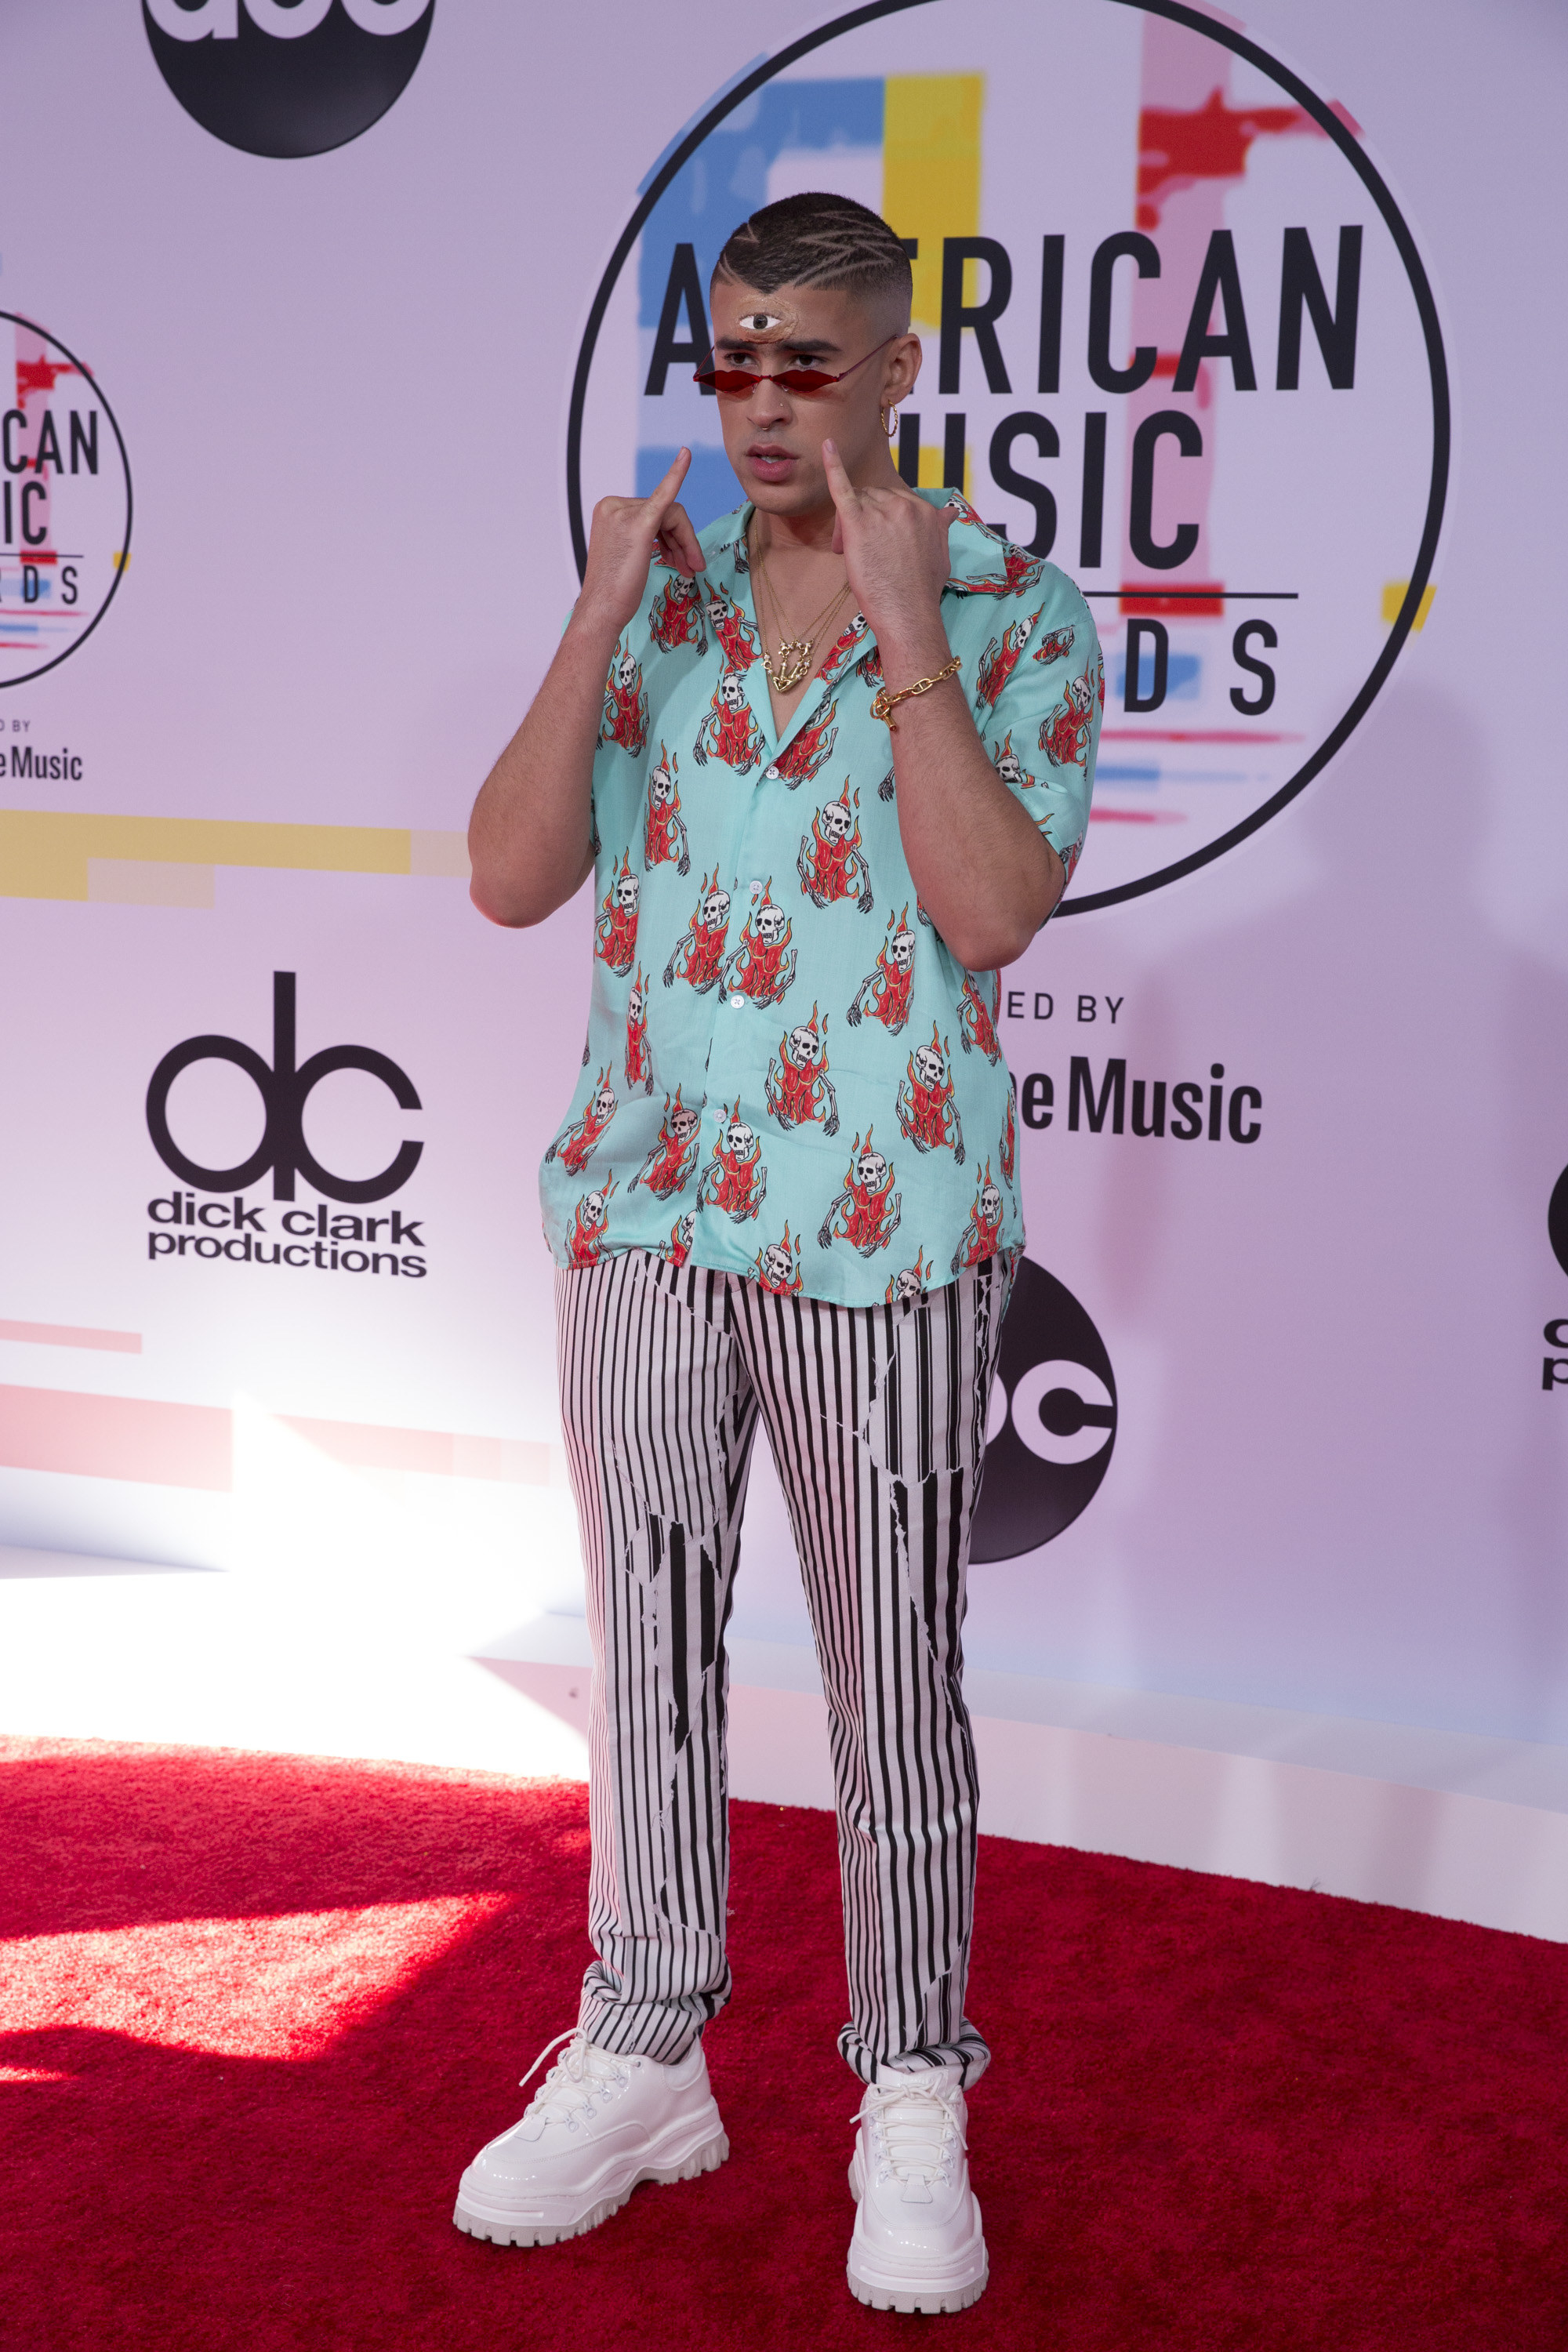 Bad Bunny at the American Music Awards in 2018